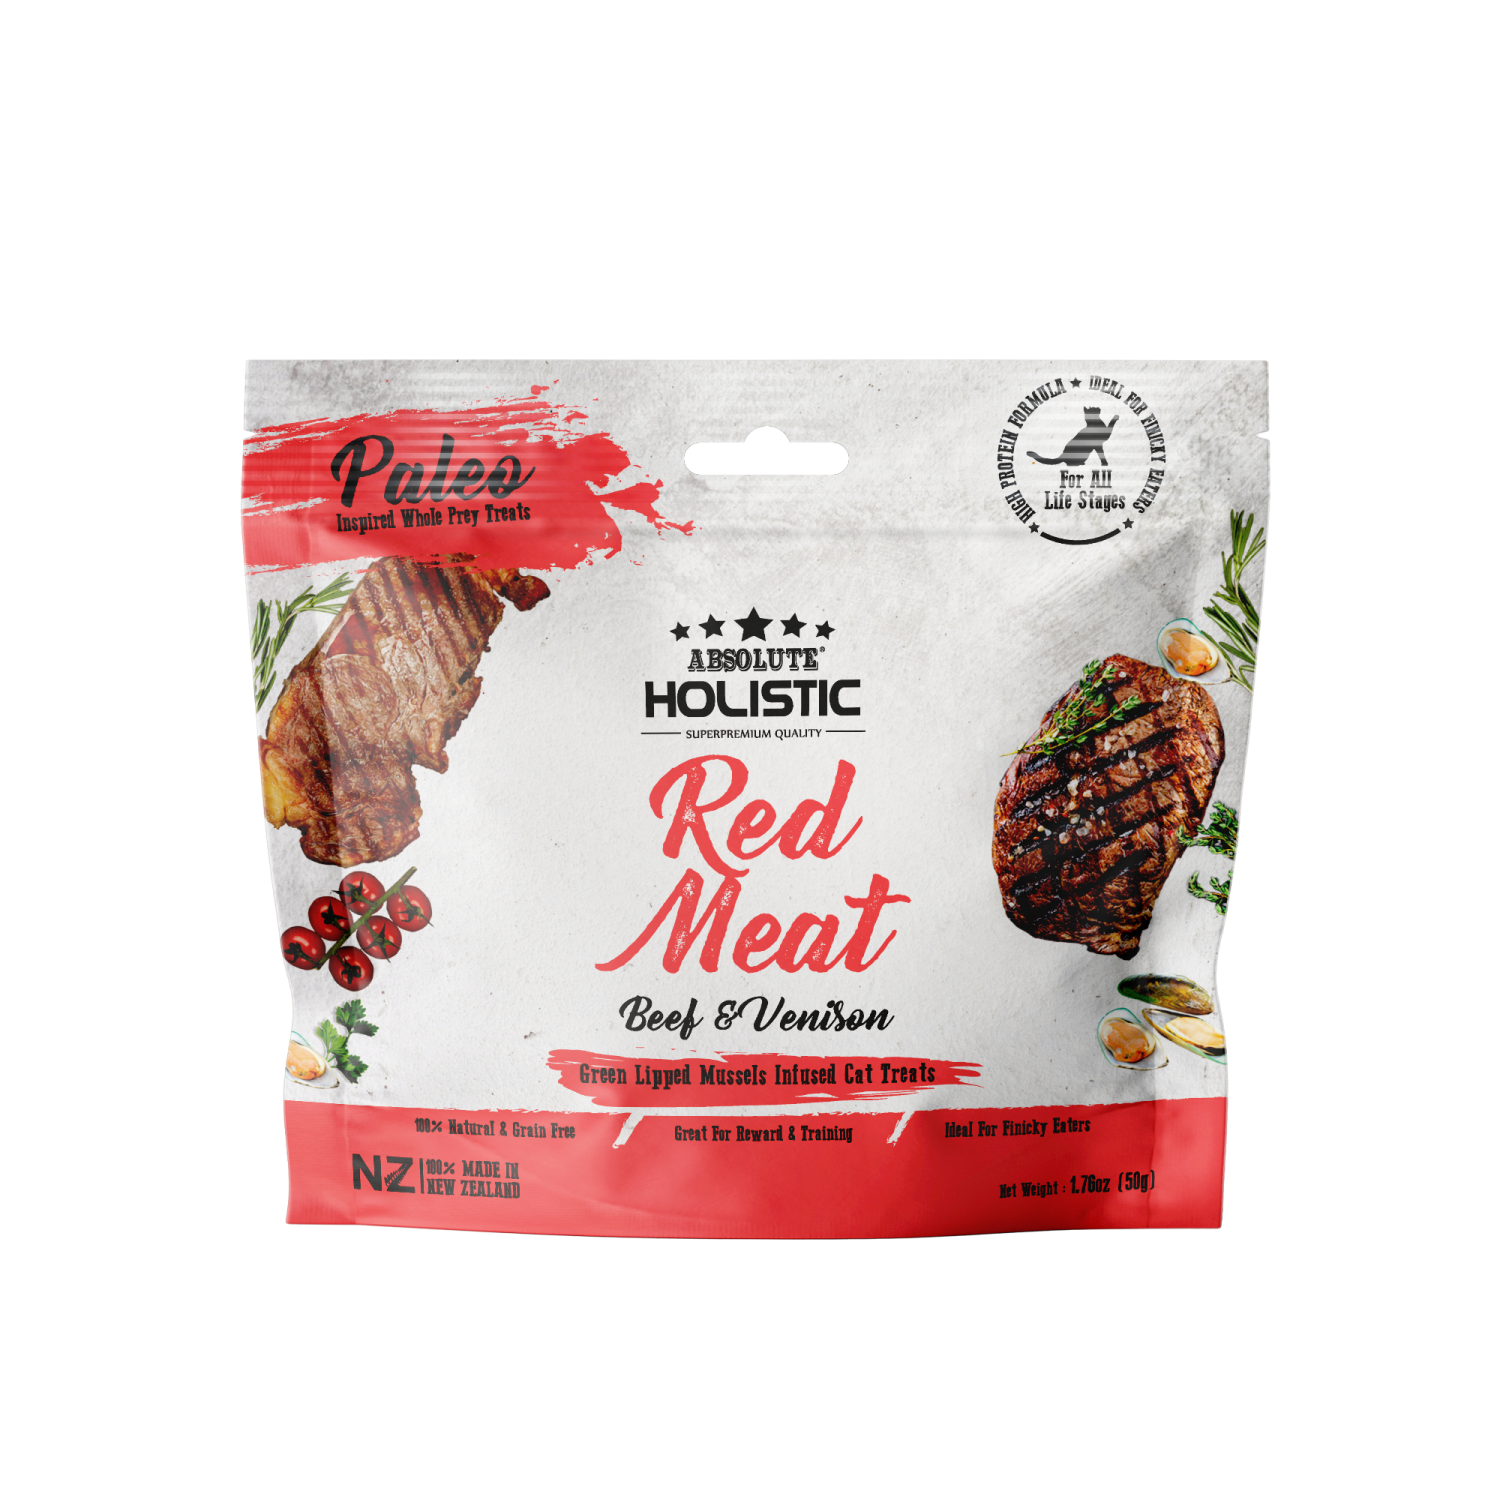 Absolute Holistic Red Meat Beef & Venison Cat Treats